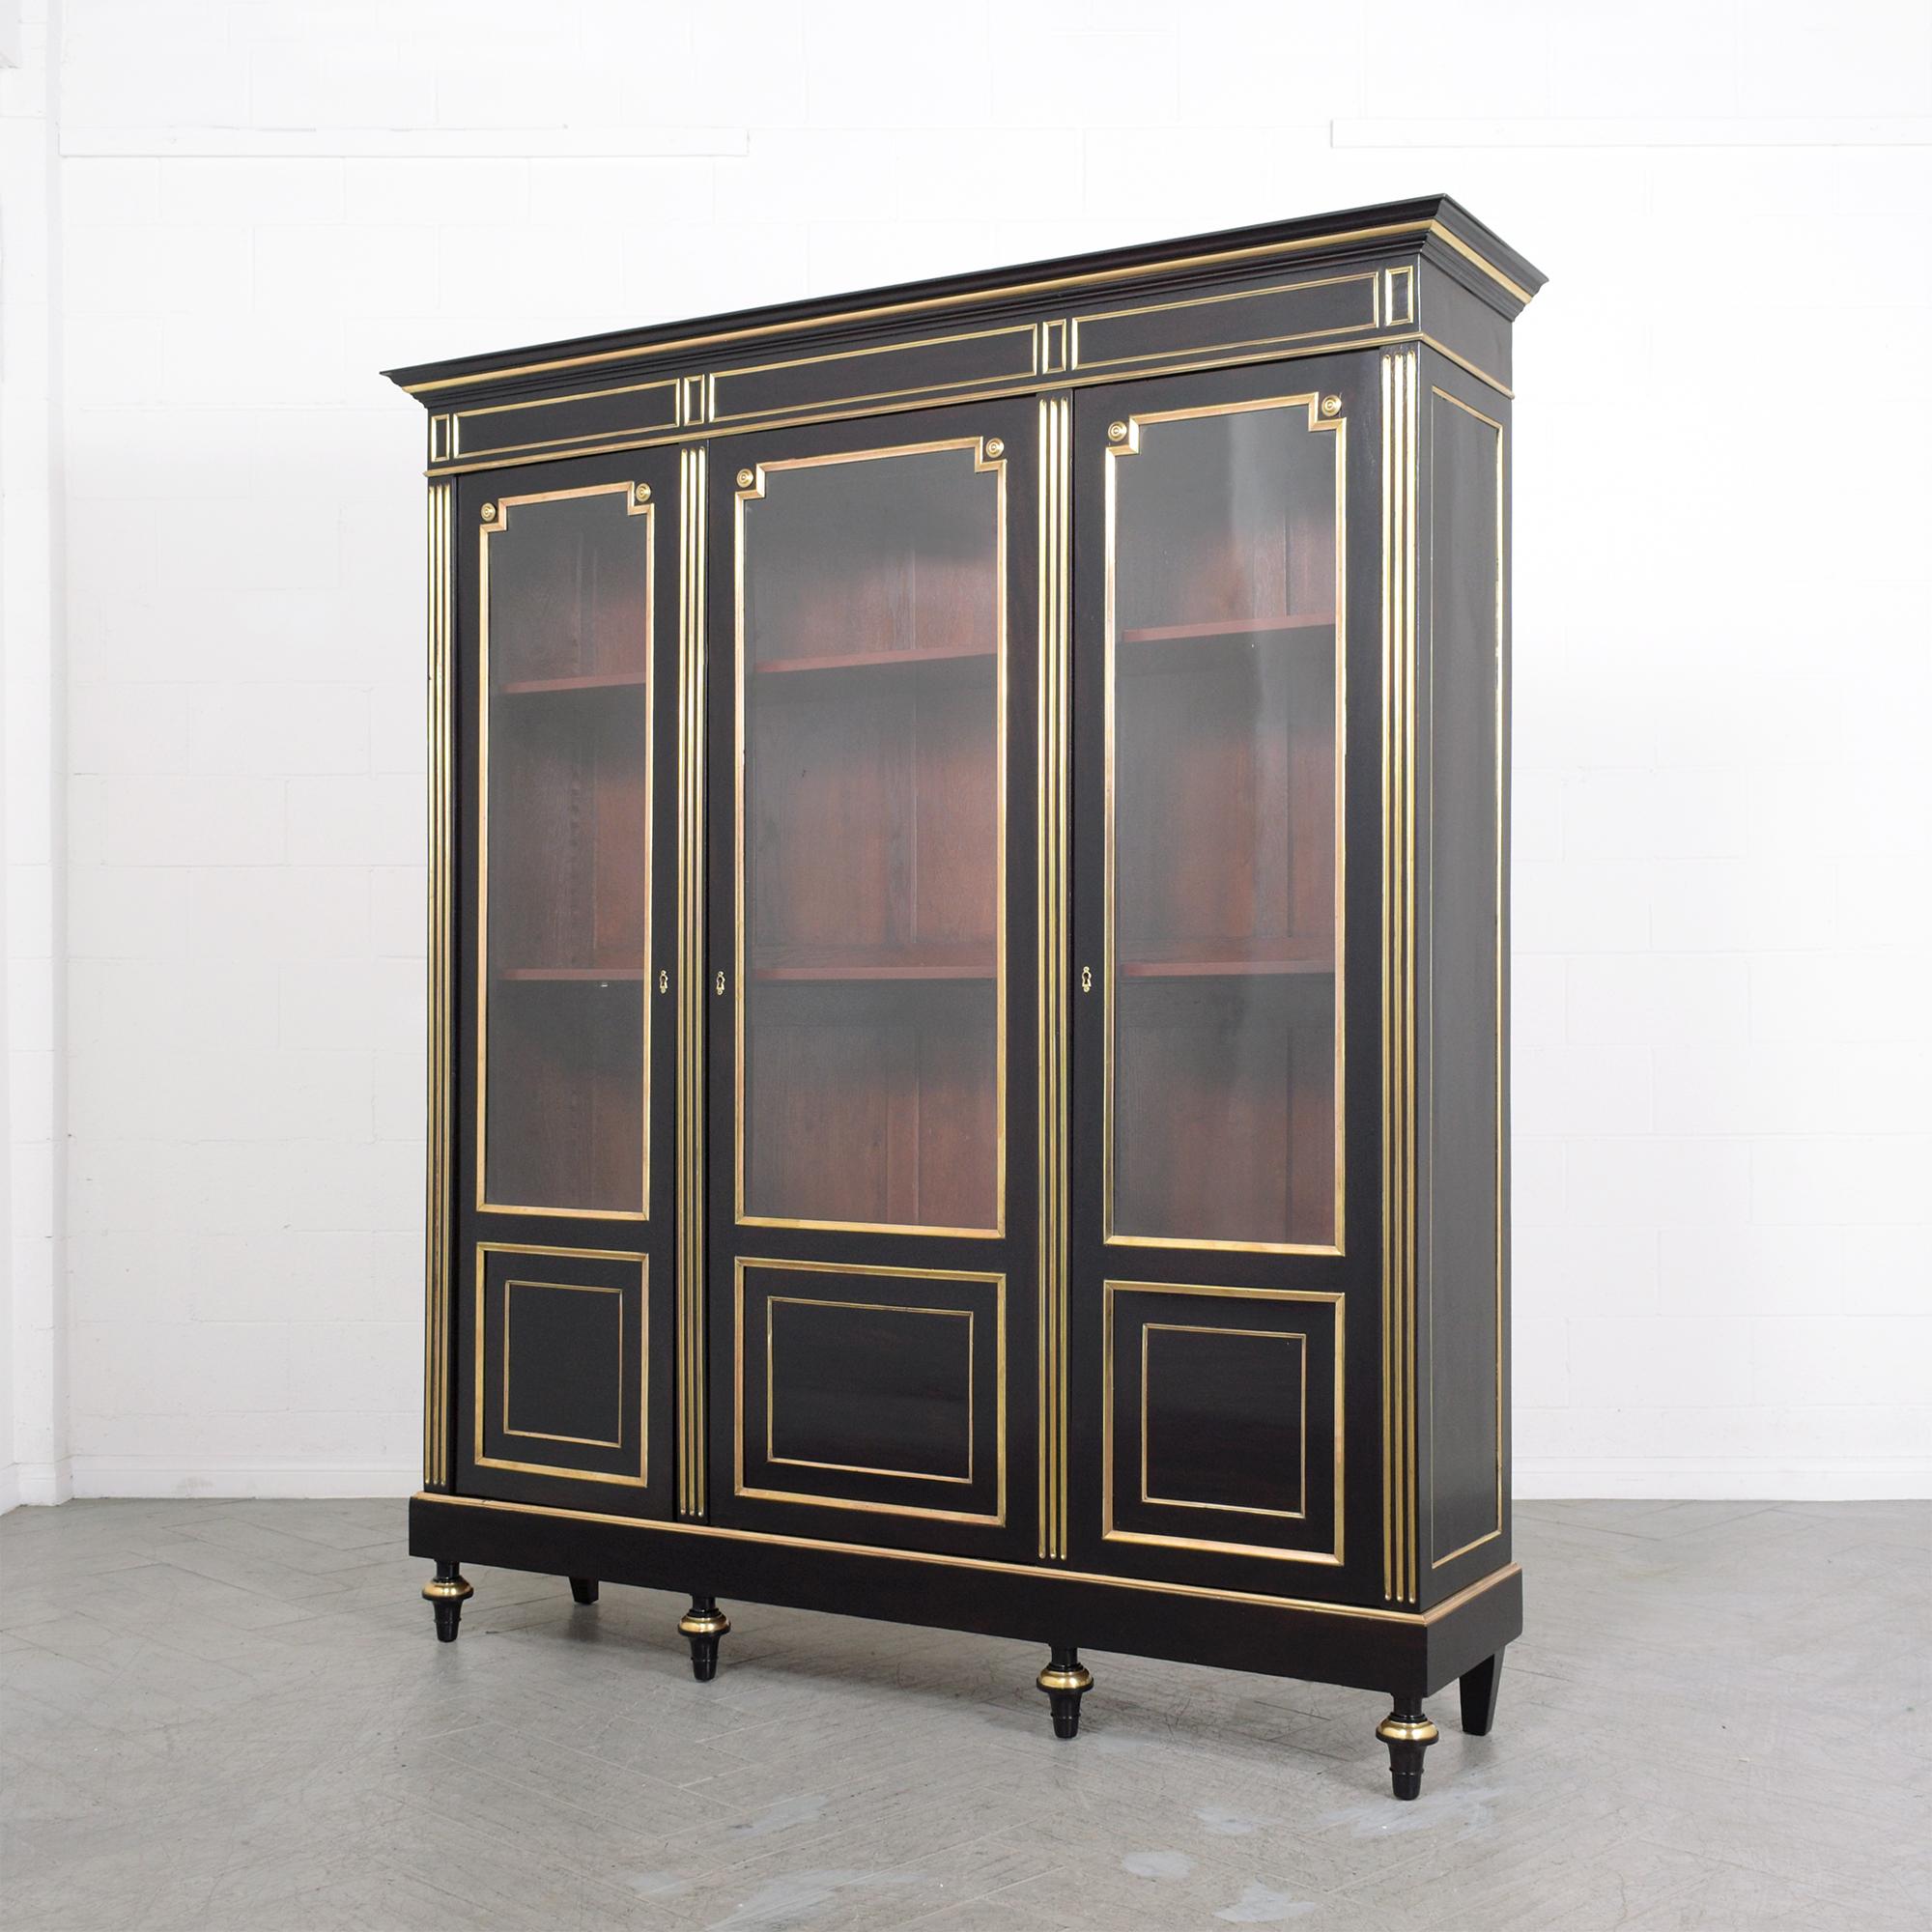 1870s Antique Louis XVI Mahogany Bookcase with Brass Moldings and Glass Doors For Sale 4